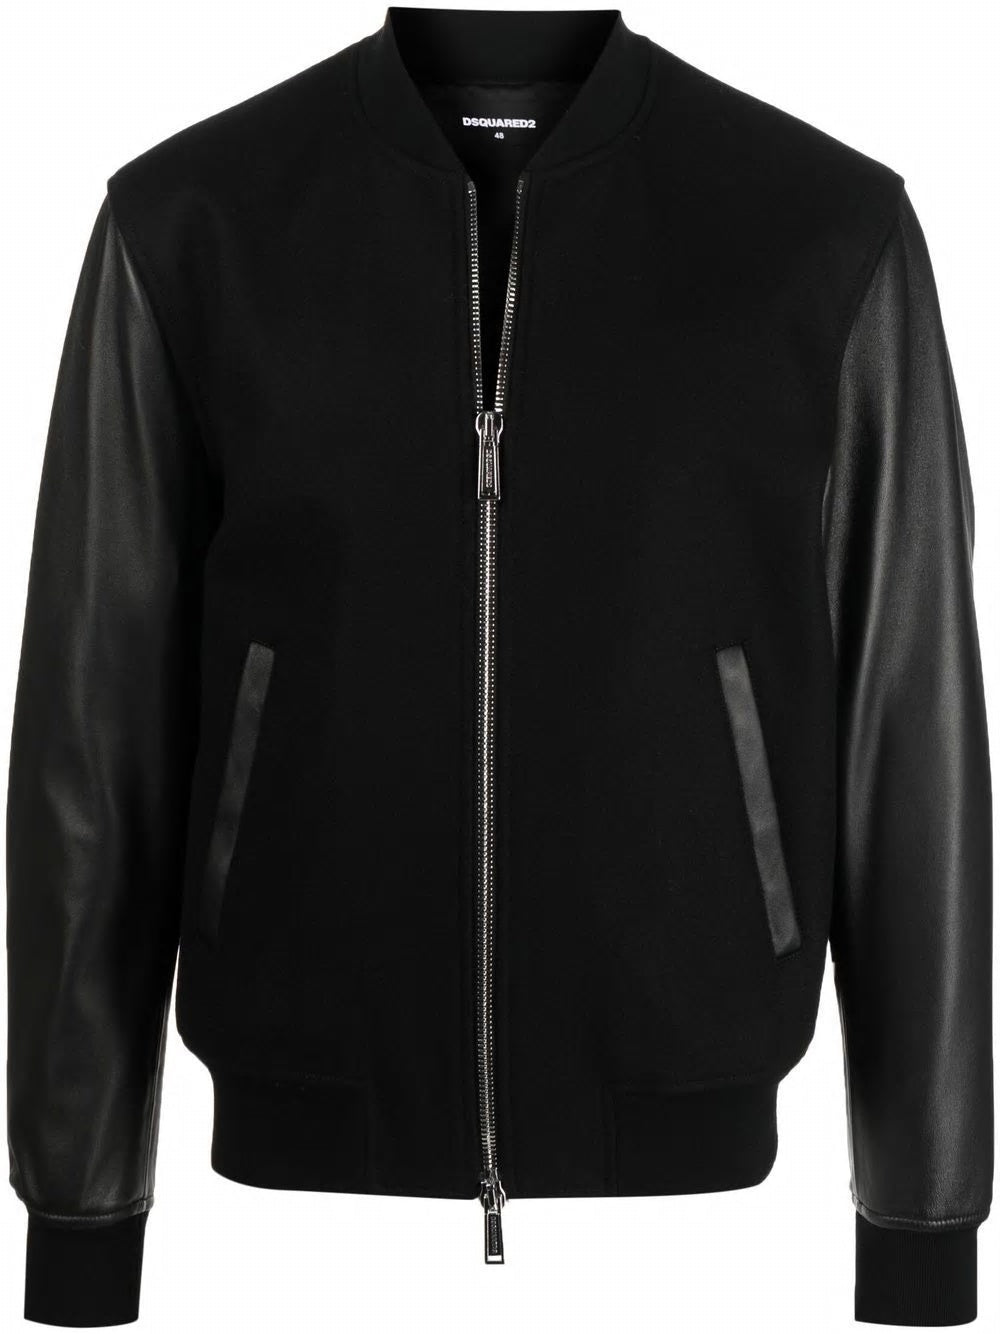 Dsquared2 Black Wool Blend Men's Sports Jacket | Fw22 Collection